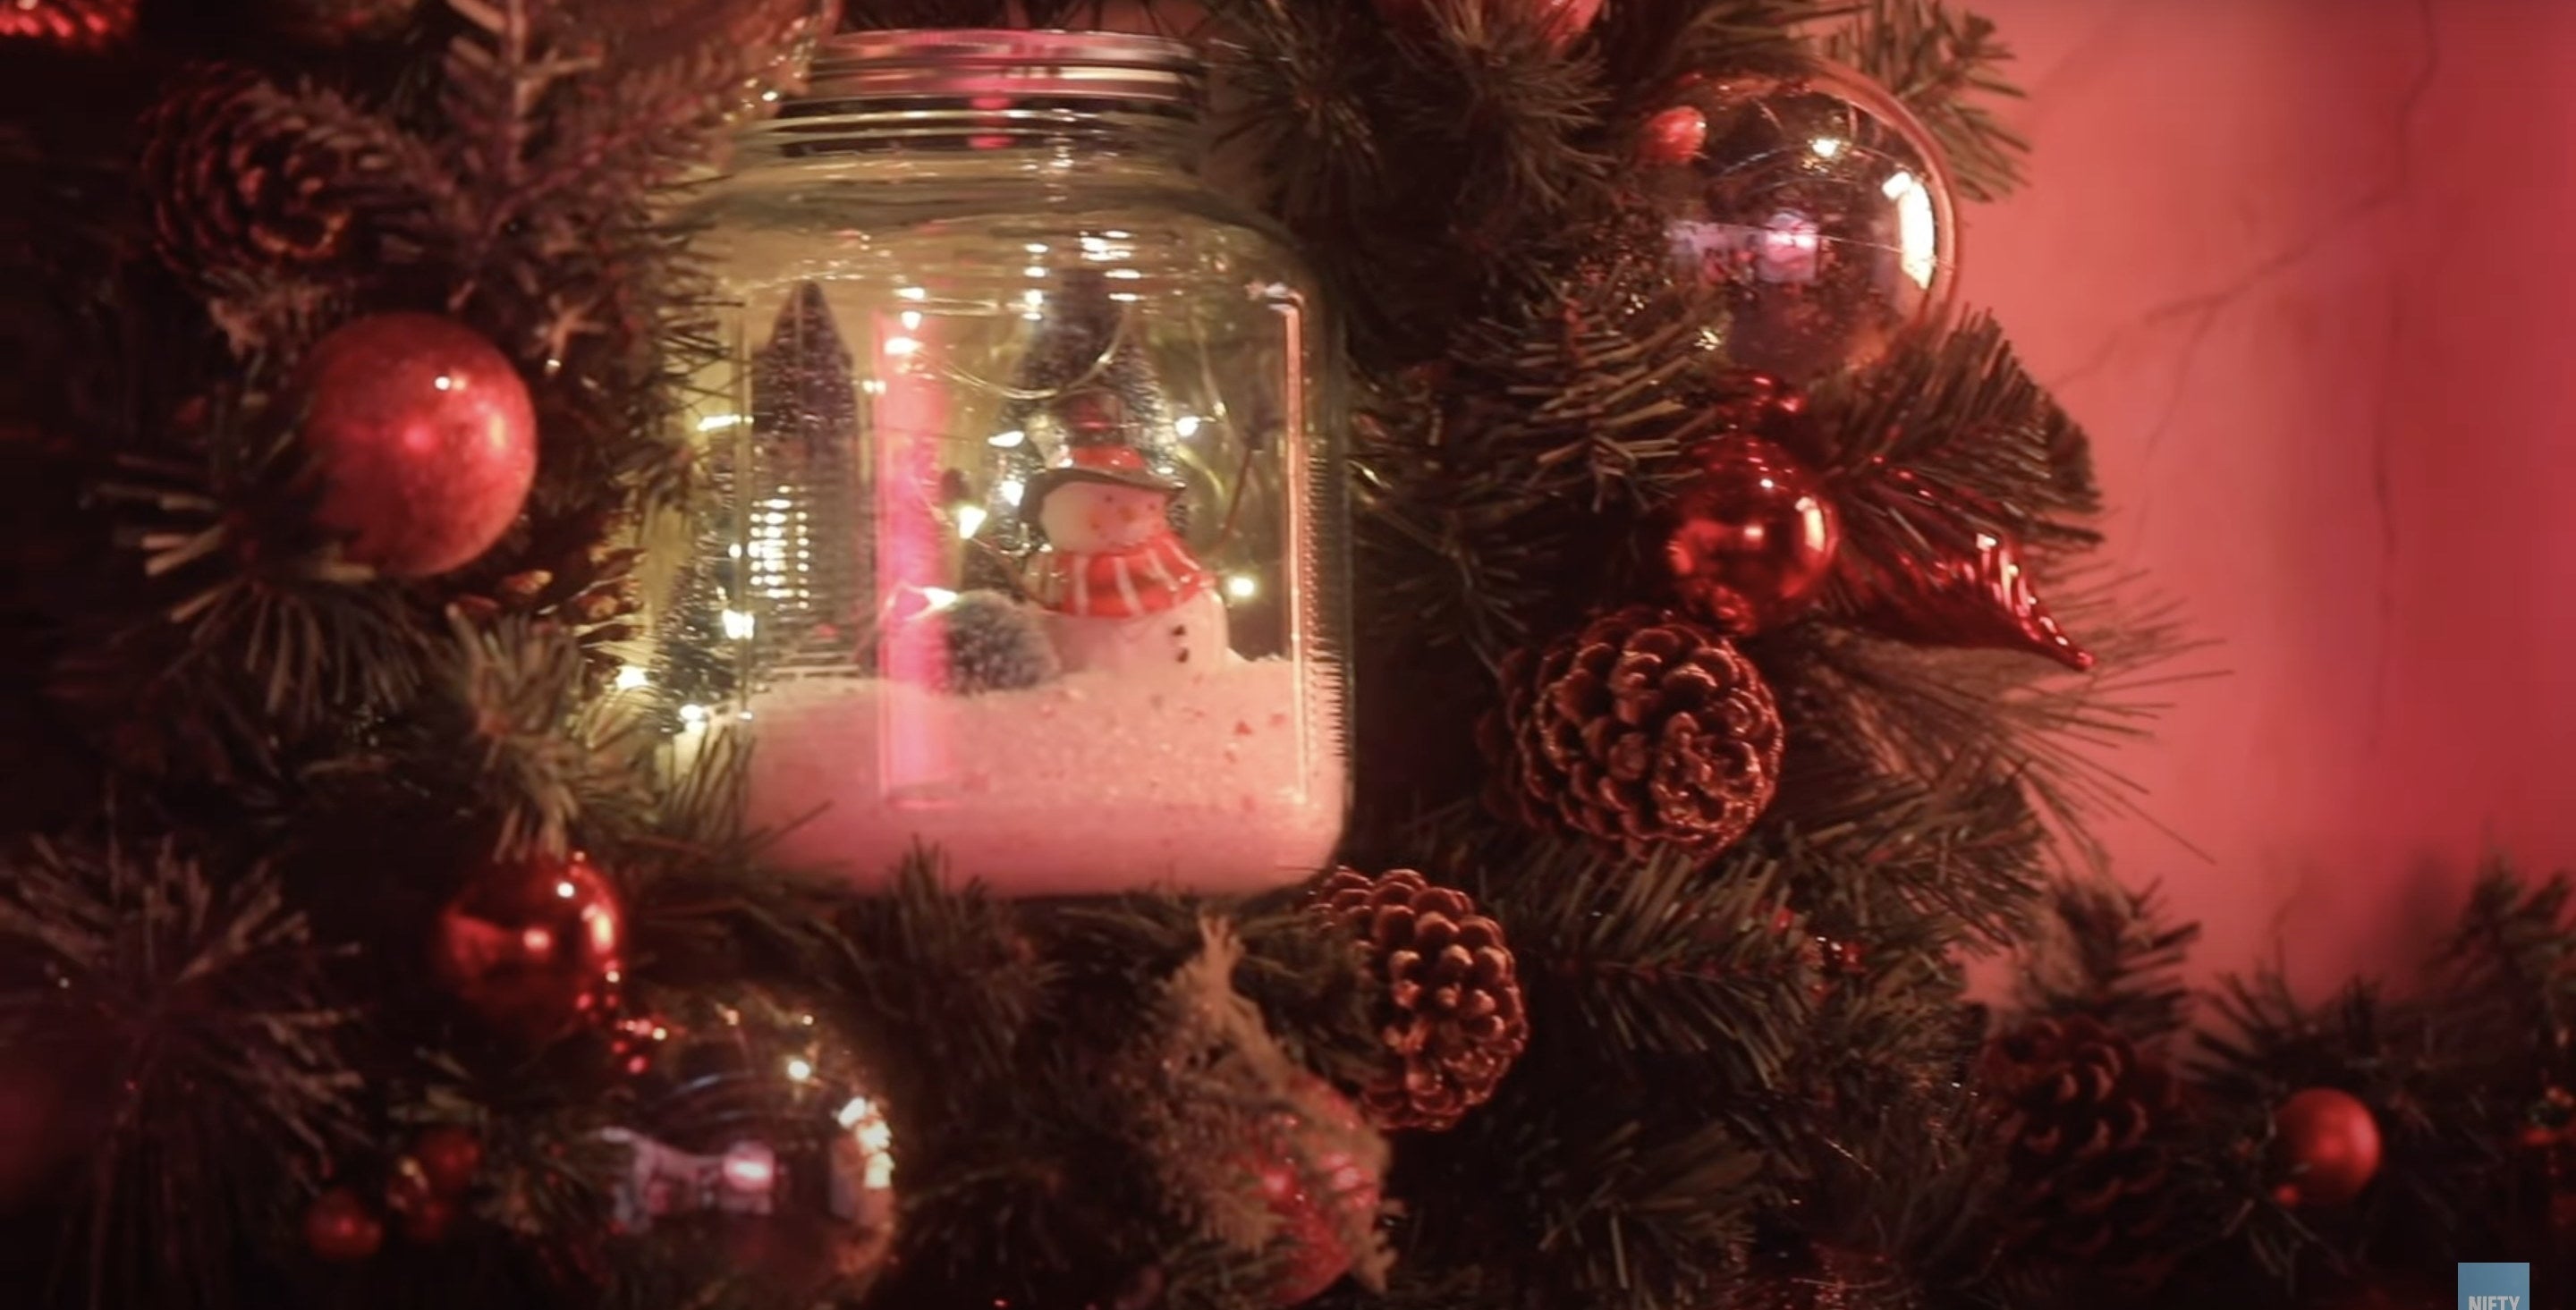 A Mason jar in the middle of a wreath with a Christmas tree and snowman scene